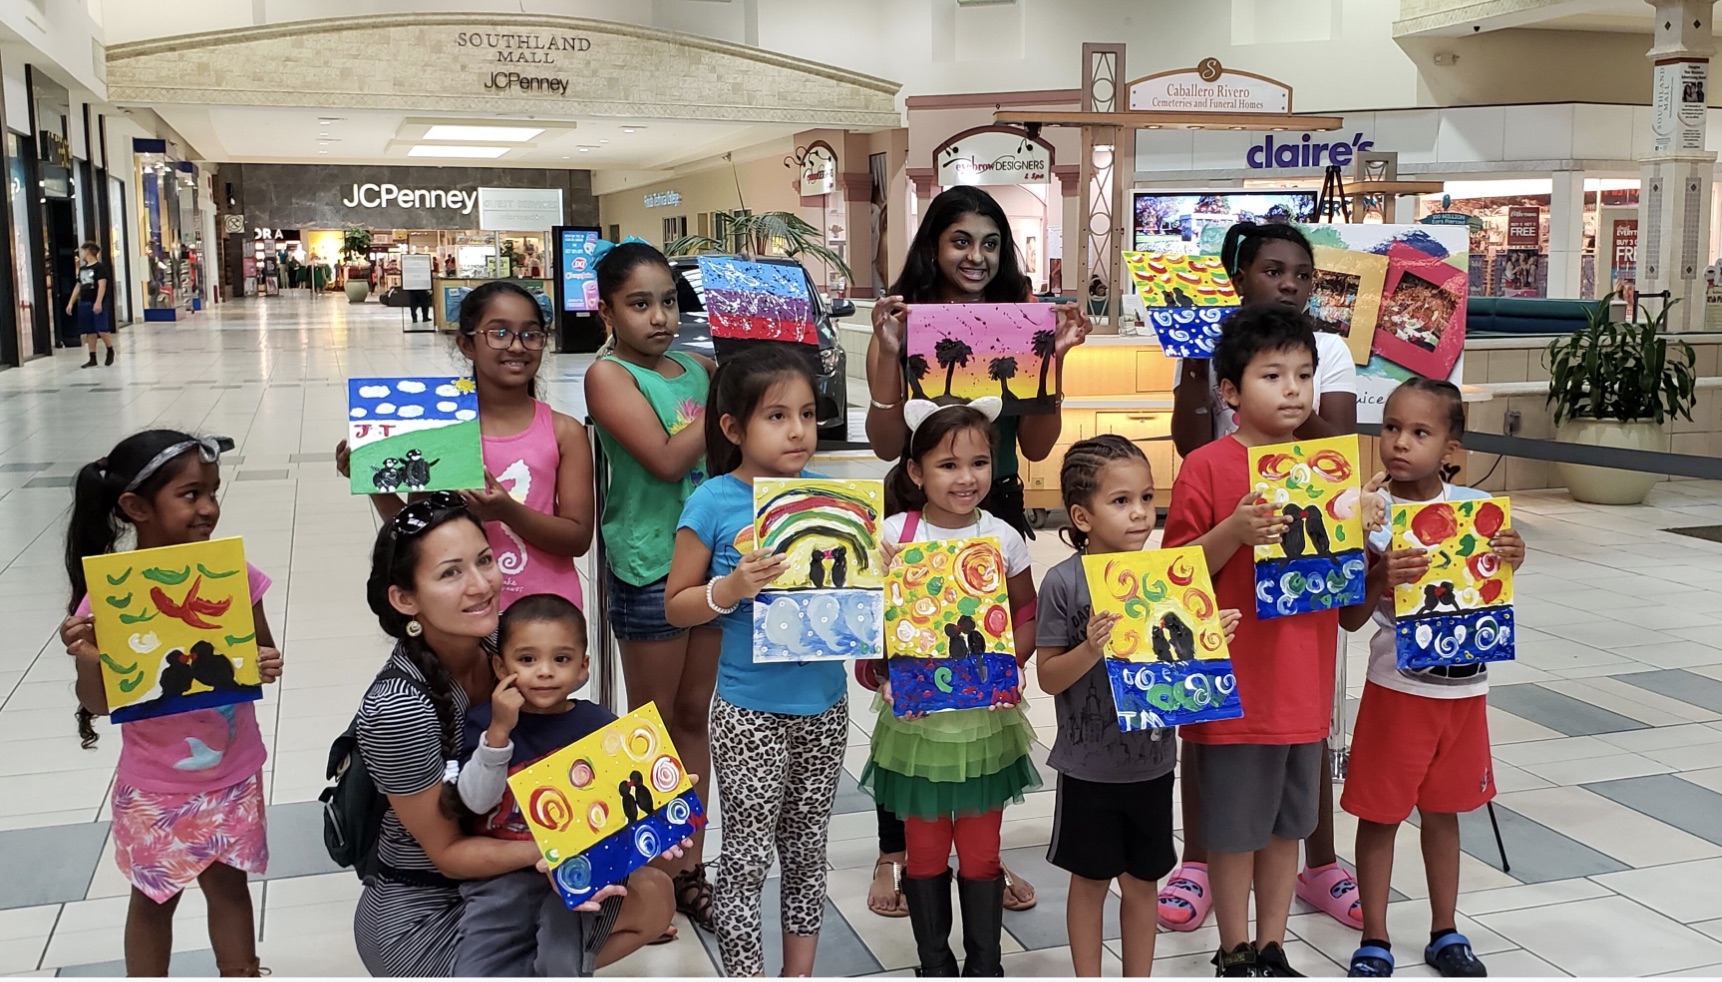 Kids learn how to create their own paintings at Art & Juice workshop at Southland Mall.